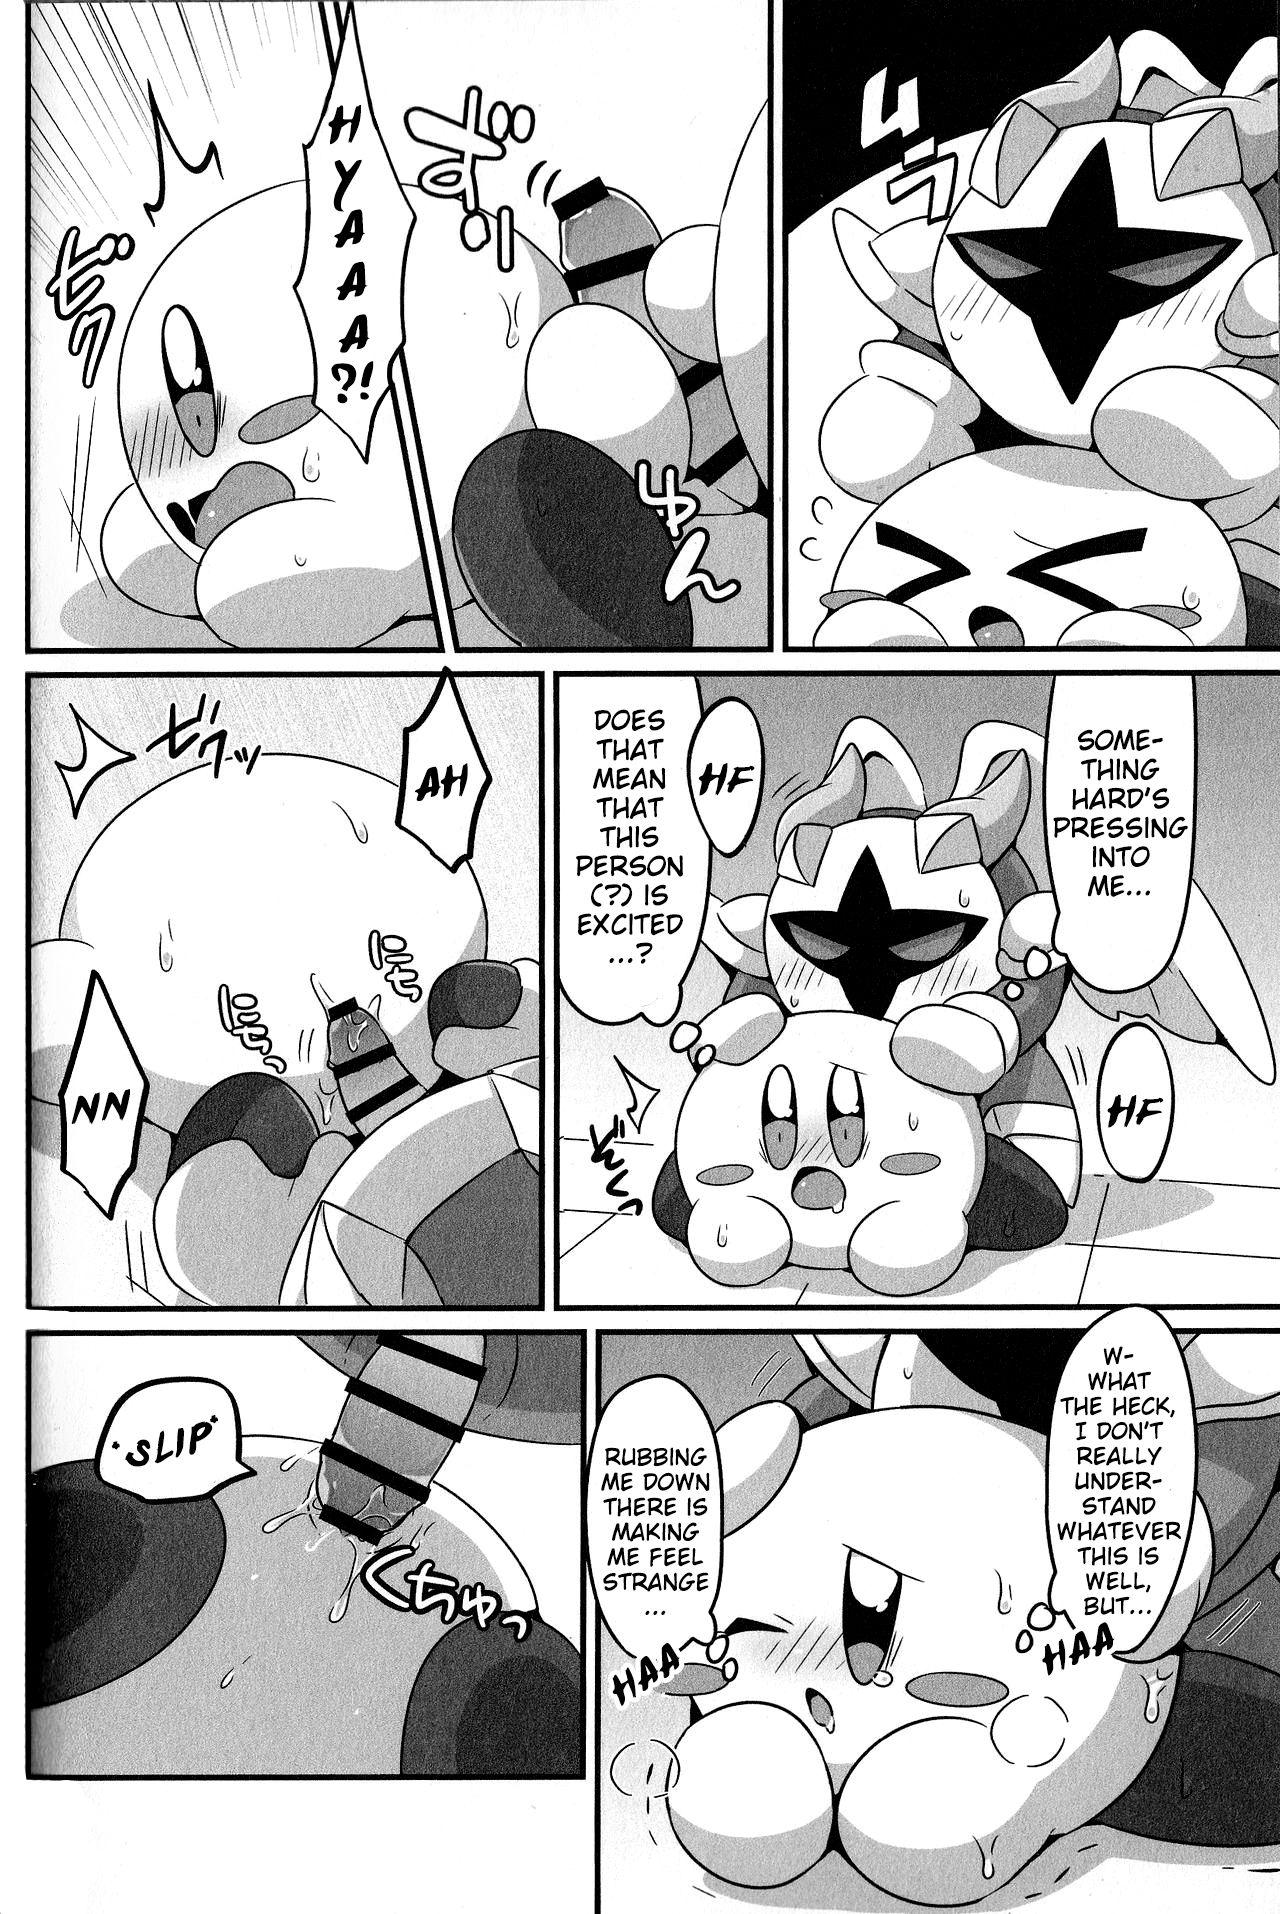 Tiny I Want to Do XXX Even For Spheres! - Kirby Mask - Page 5